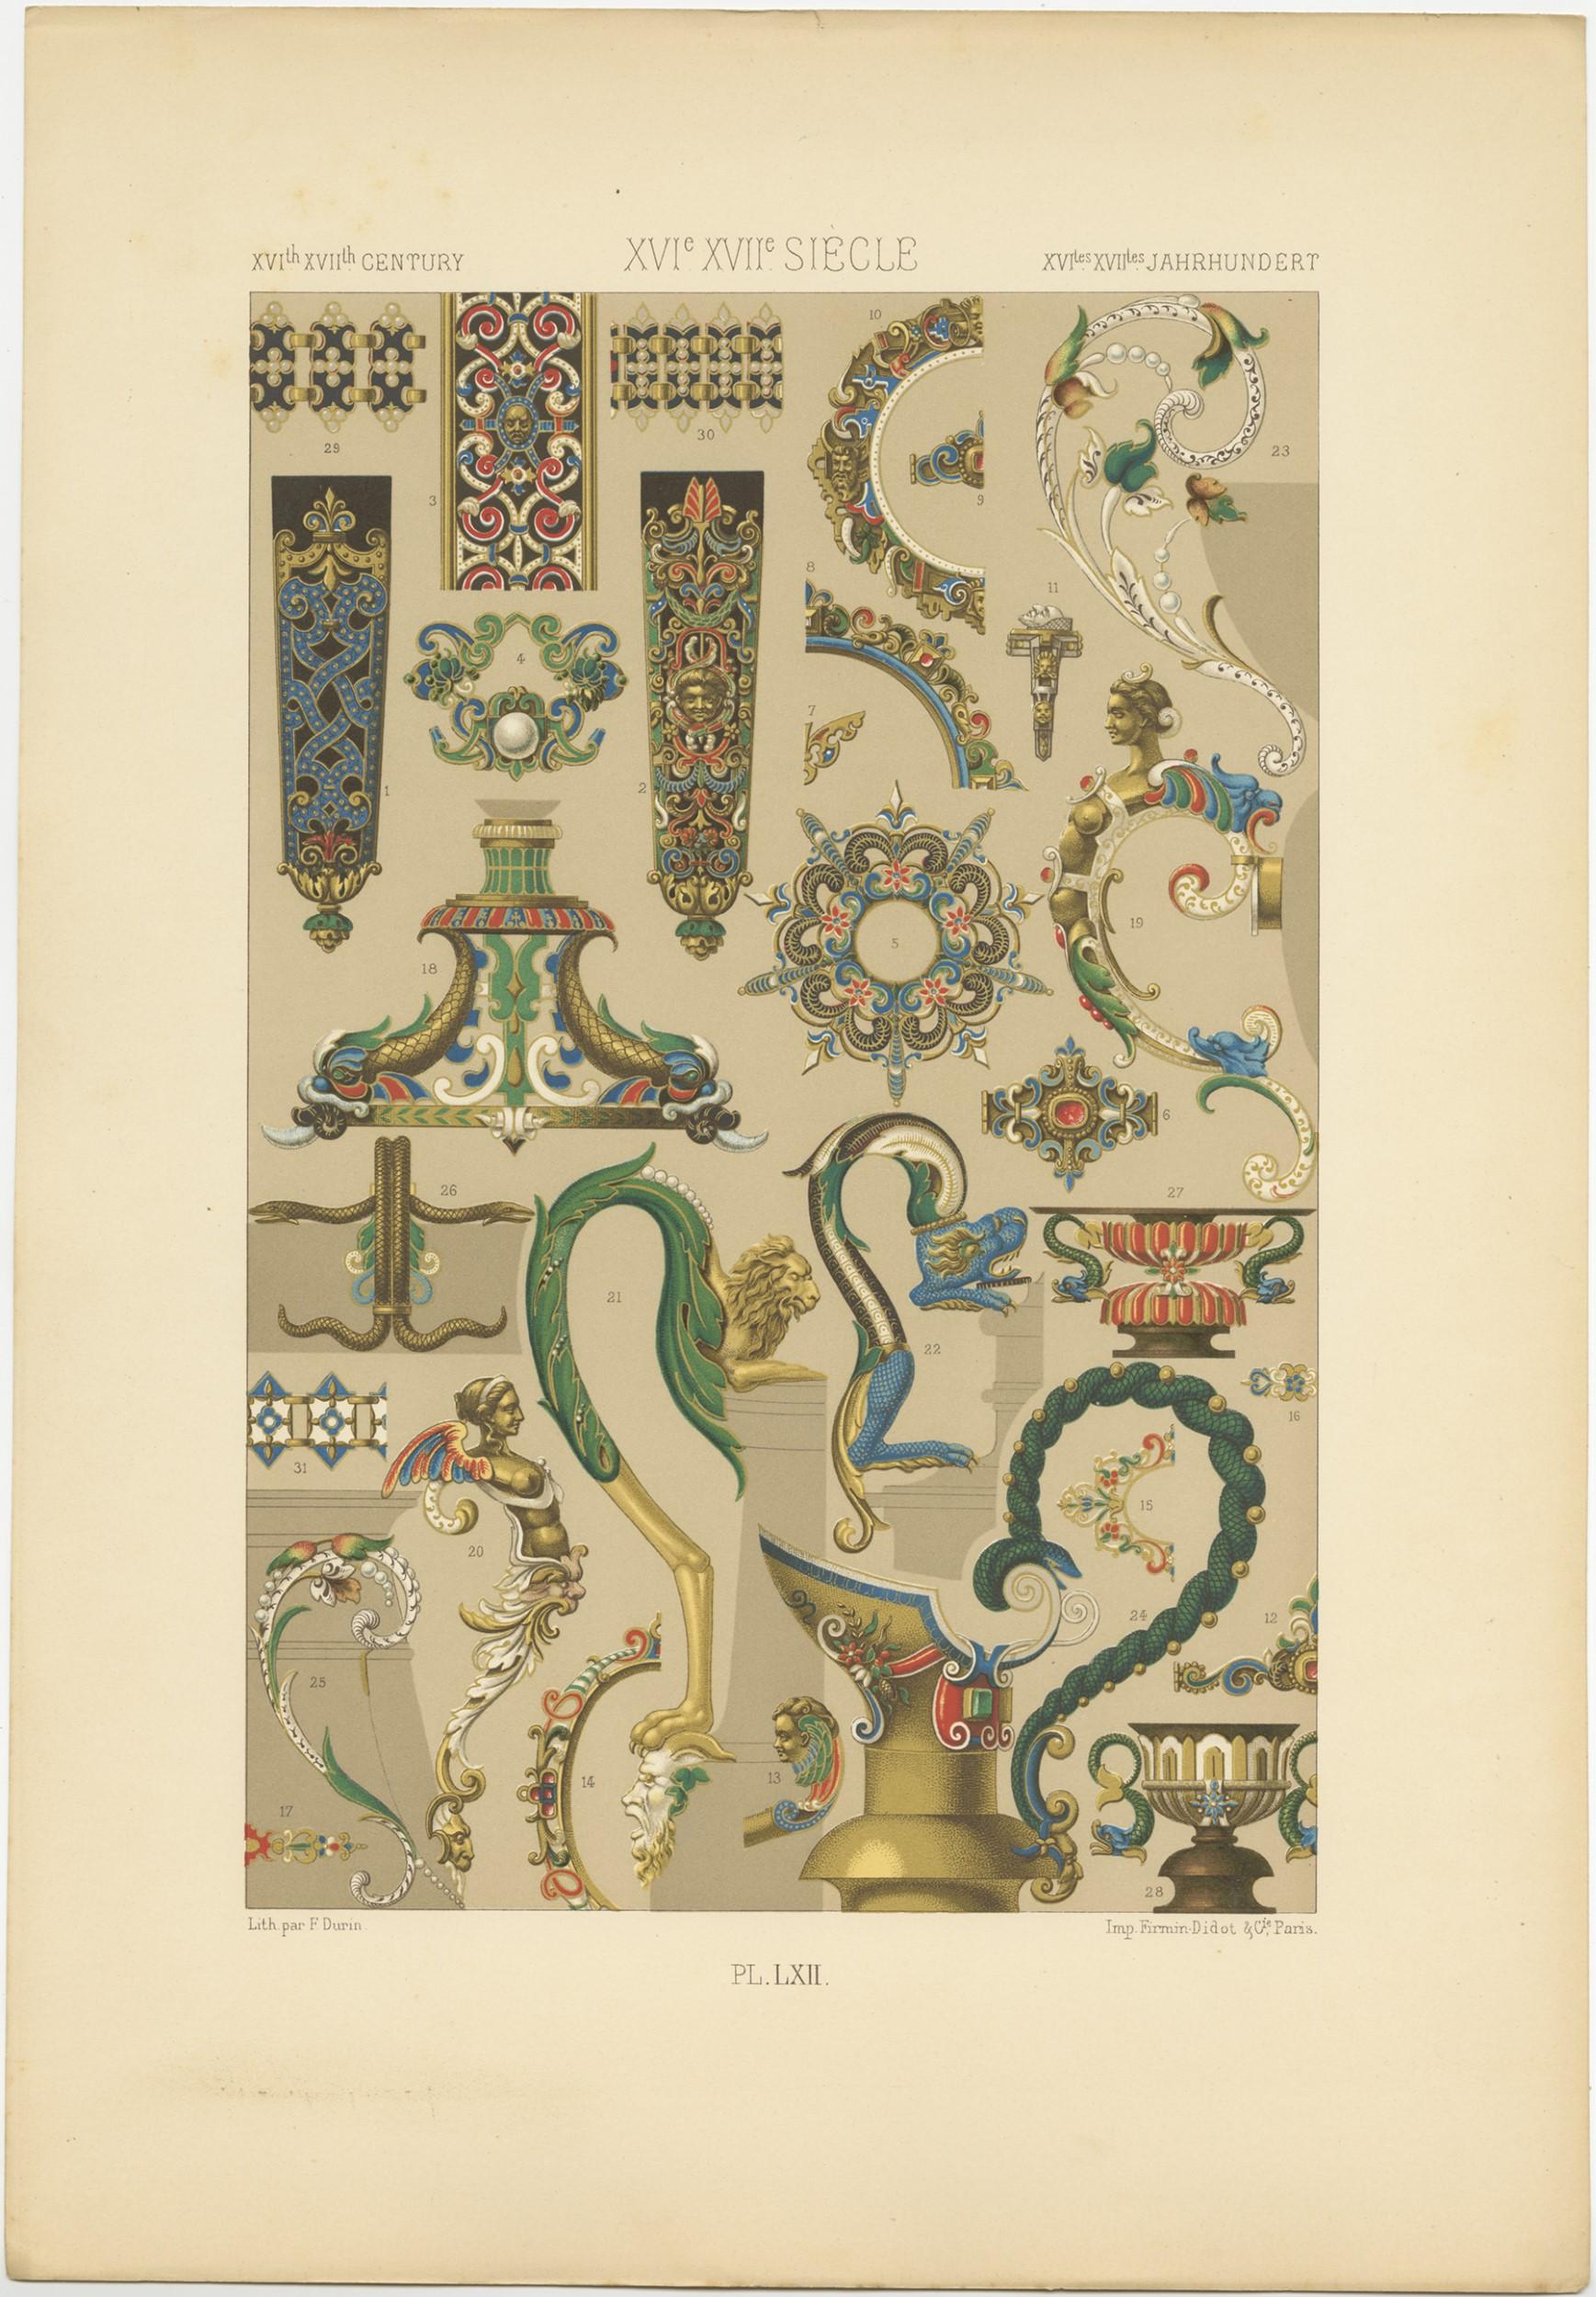 Antique print titled 'XVIth XVIIth Century - XVIth XVIIth Siecle - XVIth XVIIth Jahrundert'. Chromolithograph of 16th-17th century ornaments and decorative arts. This print originates from 'l'Ornement Polychrome' by Auguste Racinet. Published, circa